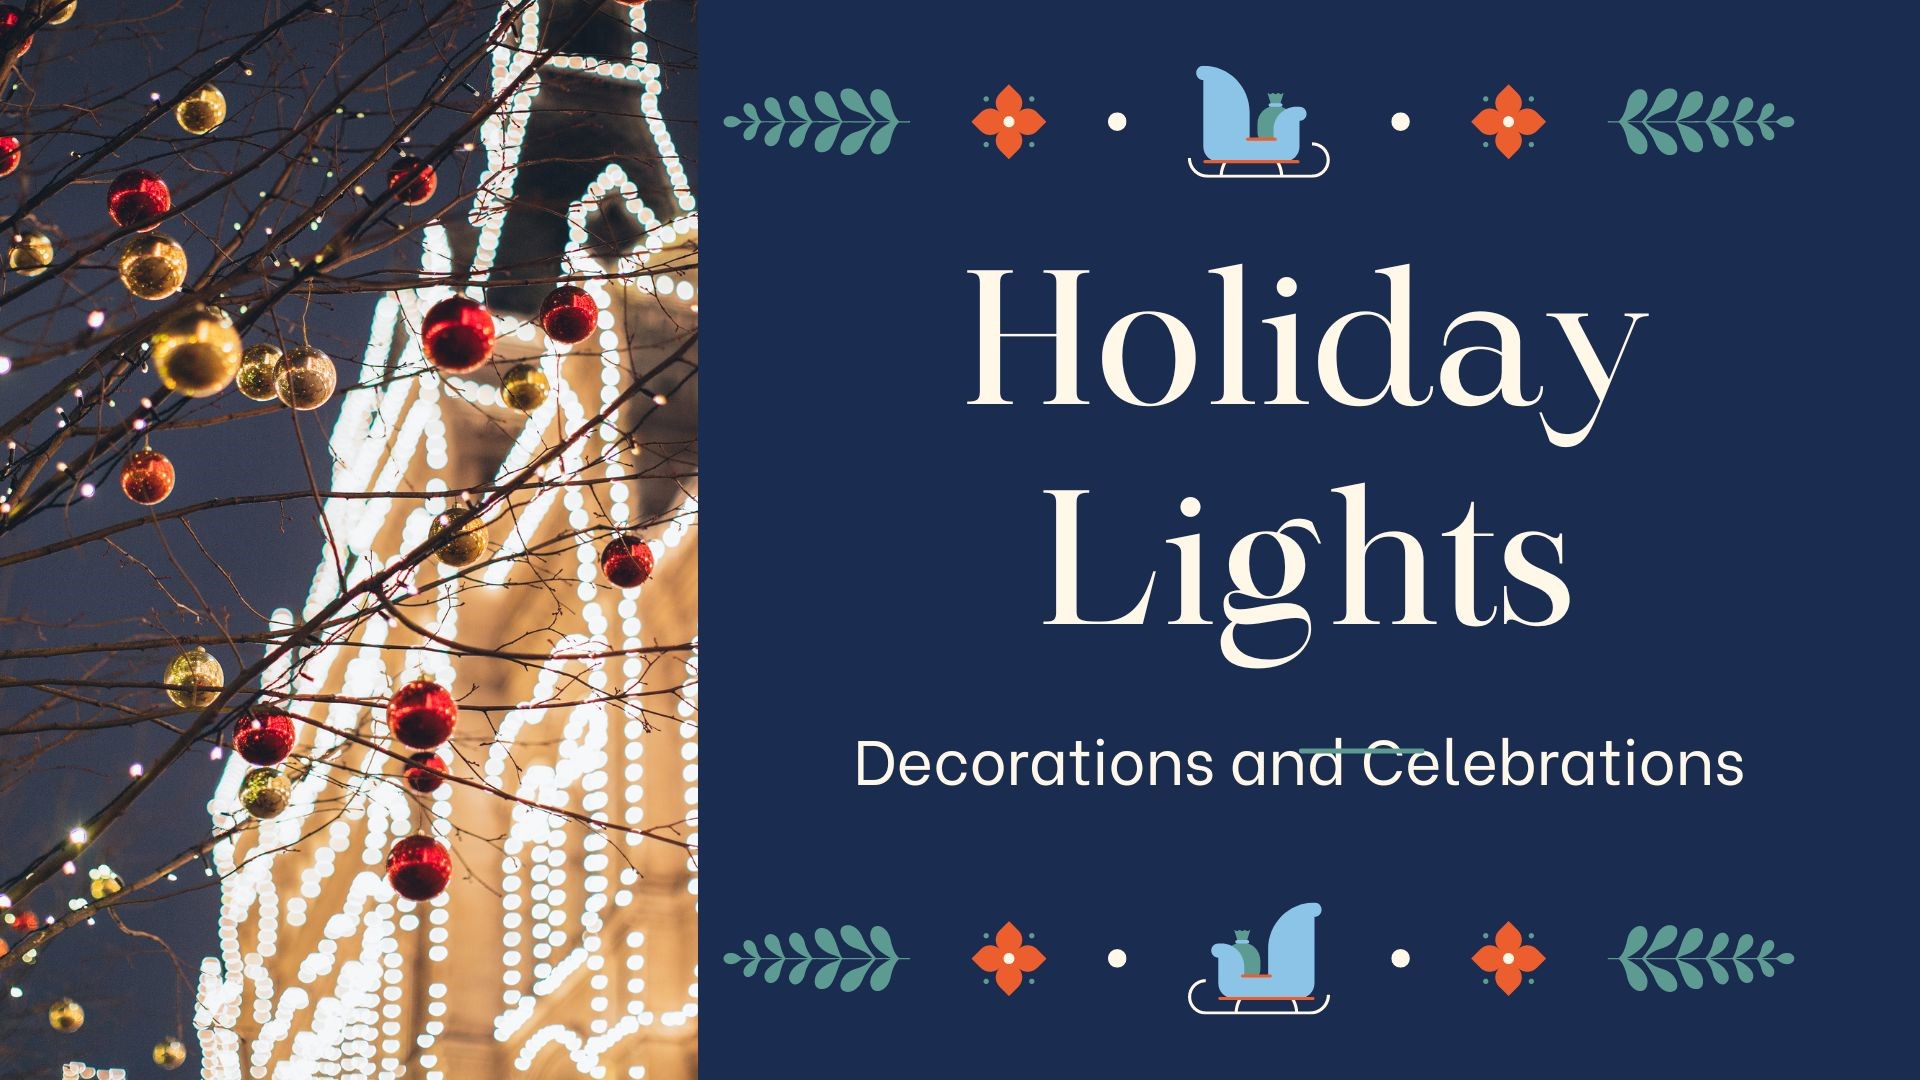 A look at holiday lighting displays and decorations across the U.S. and beyond.